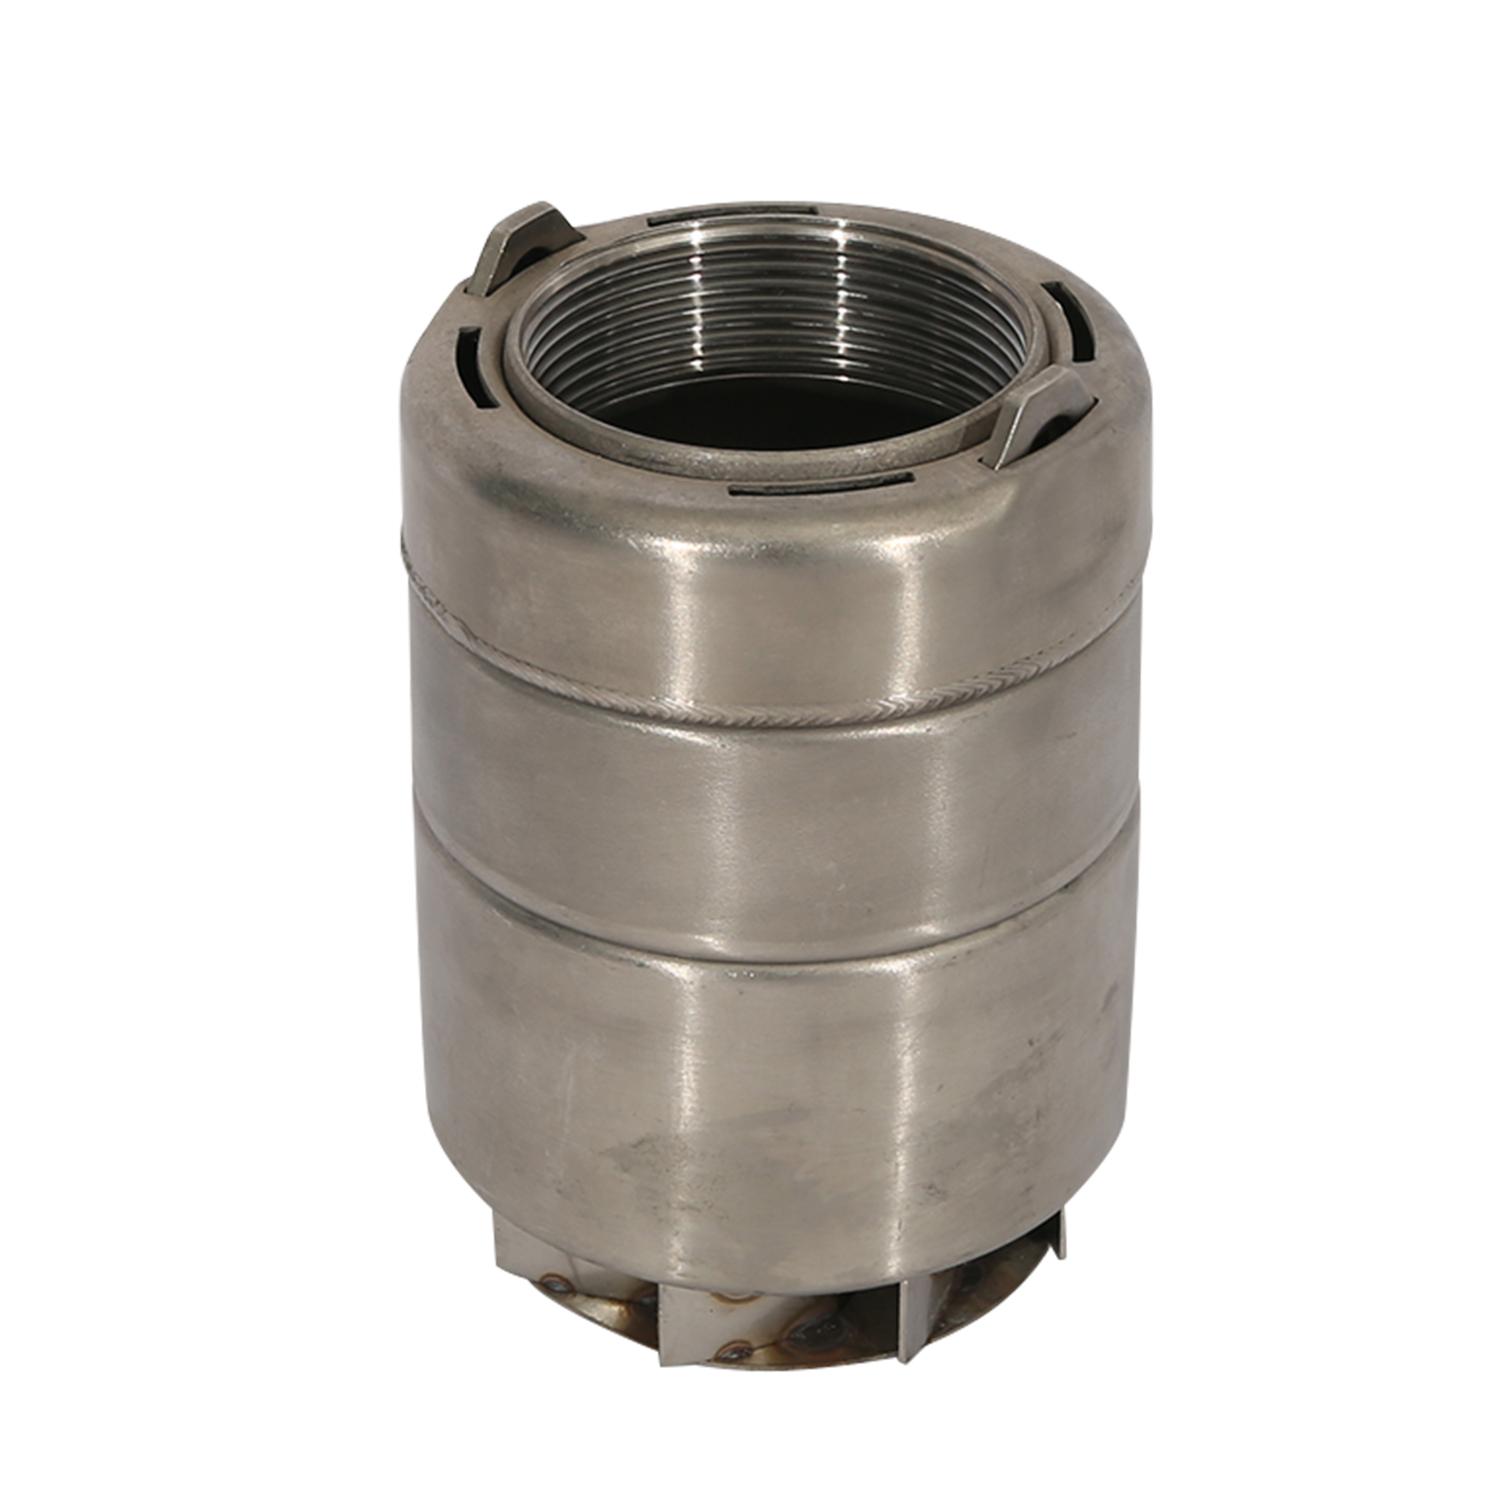 High Quality Deep Bore Well 4/6 Inch Water Cooling Submersible Pump Motor